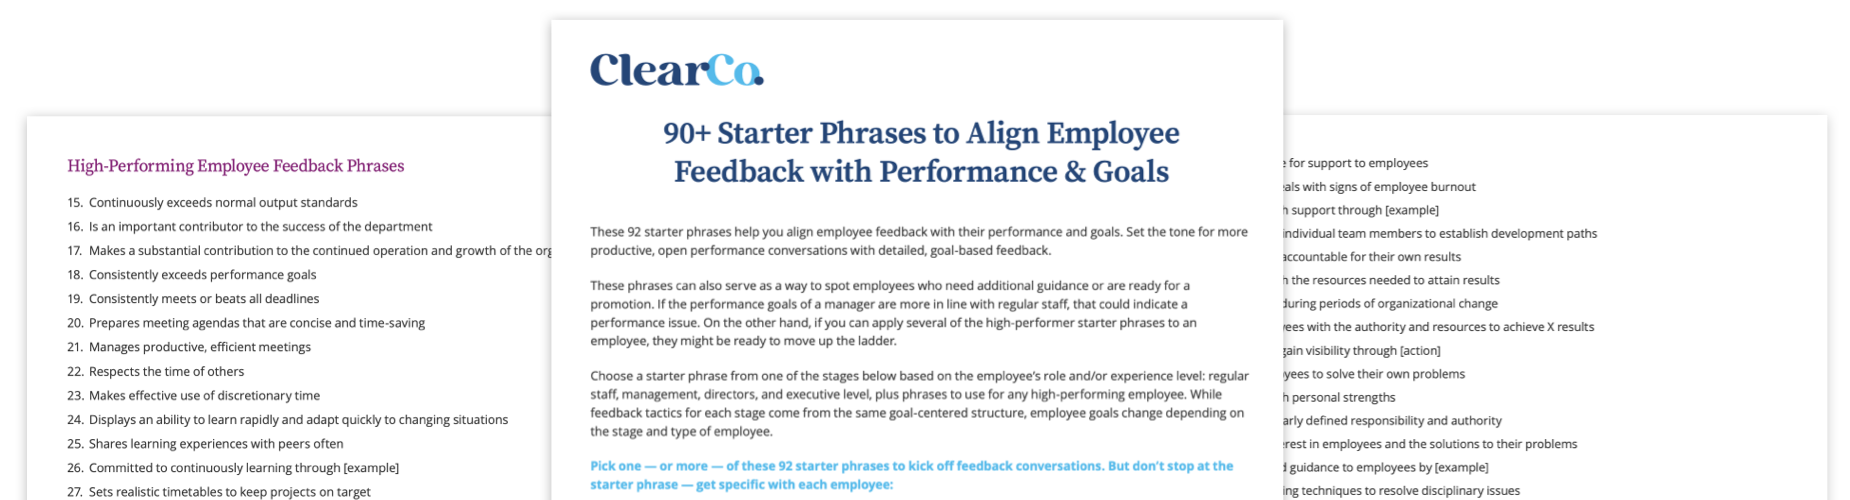 90-Plus-Start-Phrases-to-Align-Employee-Feedback-with-Performance-Goals-Mockup